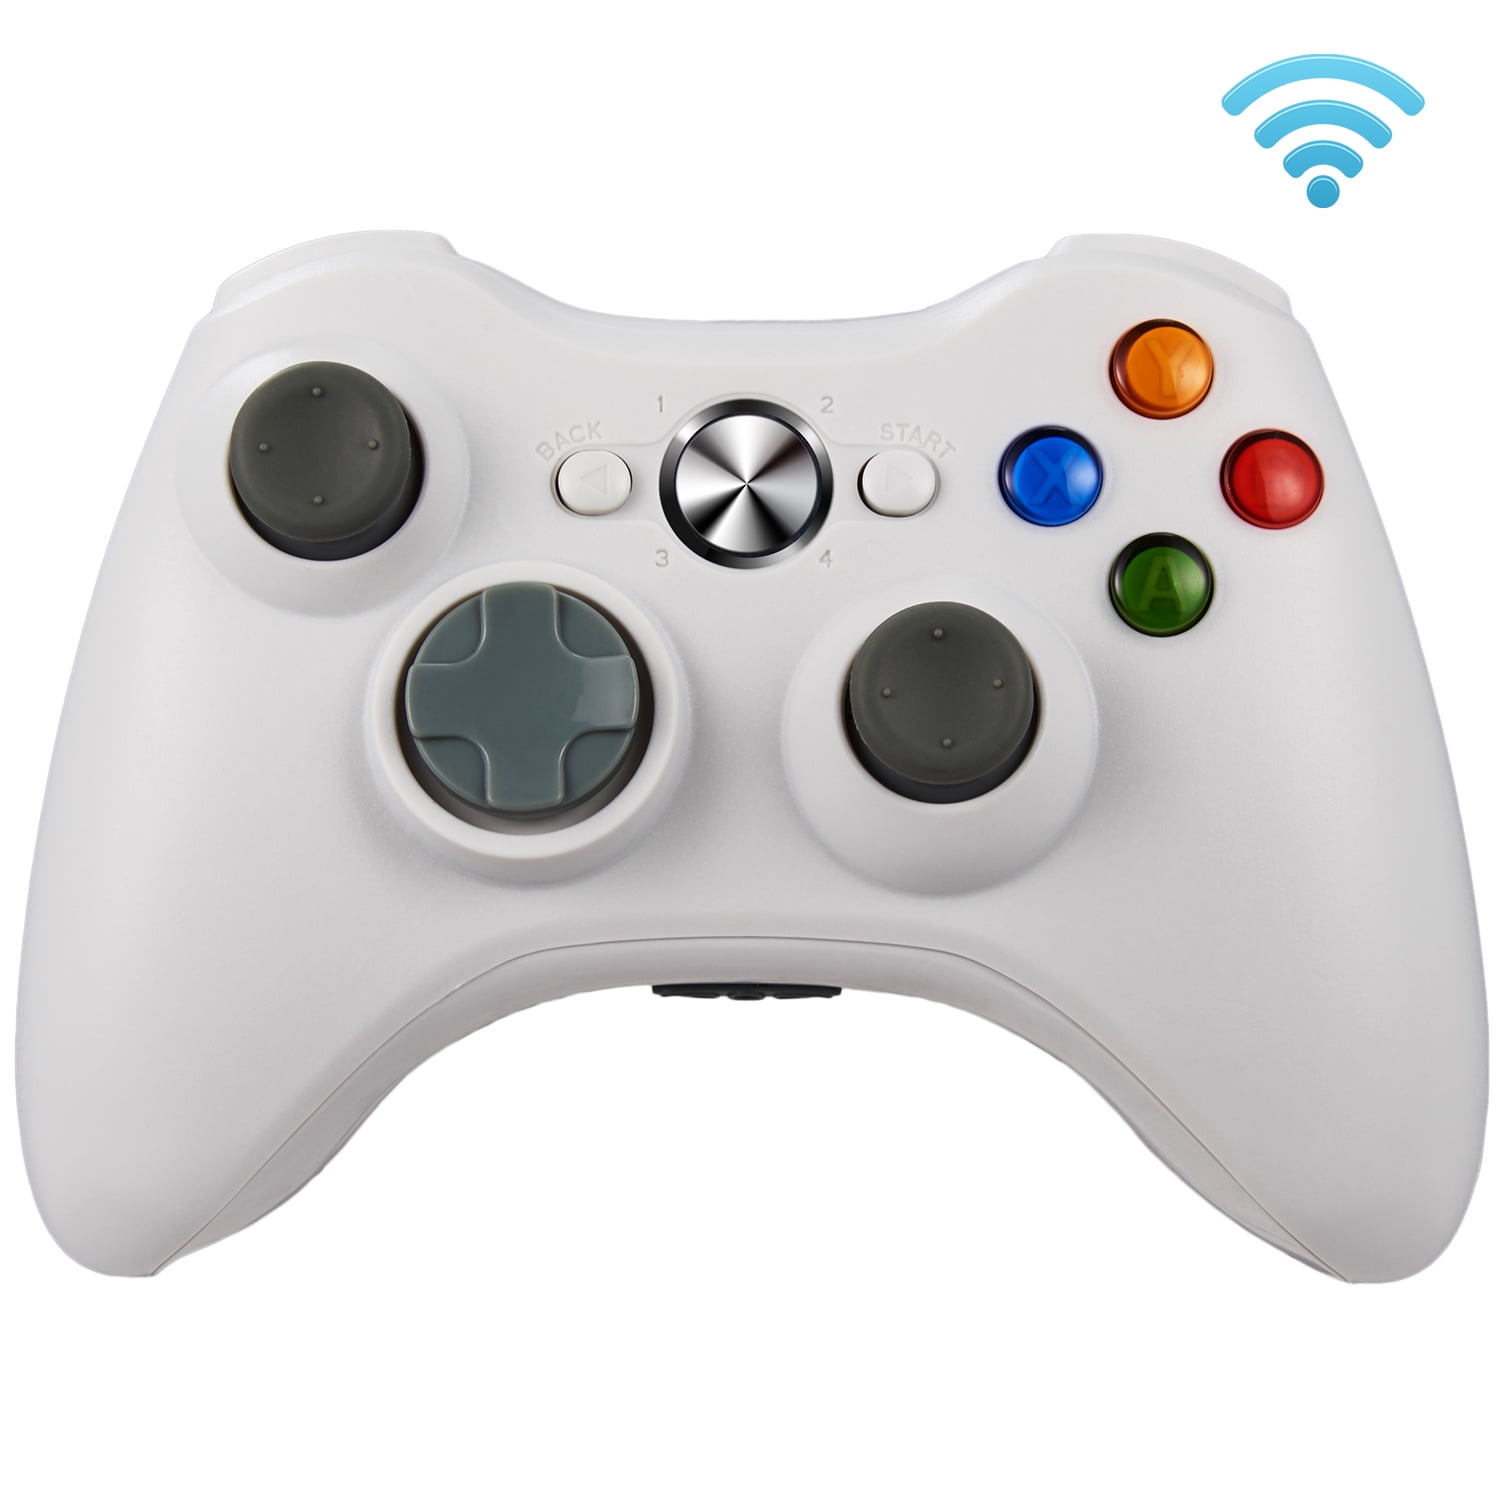 ,Customized Fire-Cloud Wireless Controller for Xbox 360 Gamepad Joystick Controller Remote for Xbox 360 Slim Console,Upgraded Joystick/Double Shock 